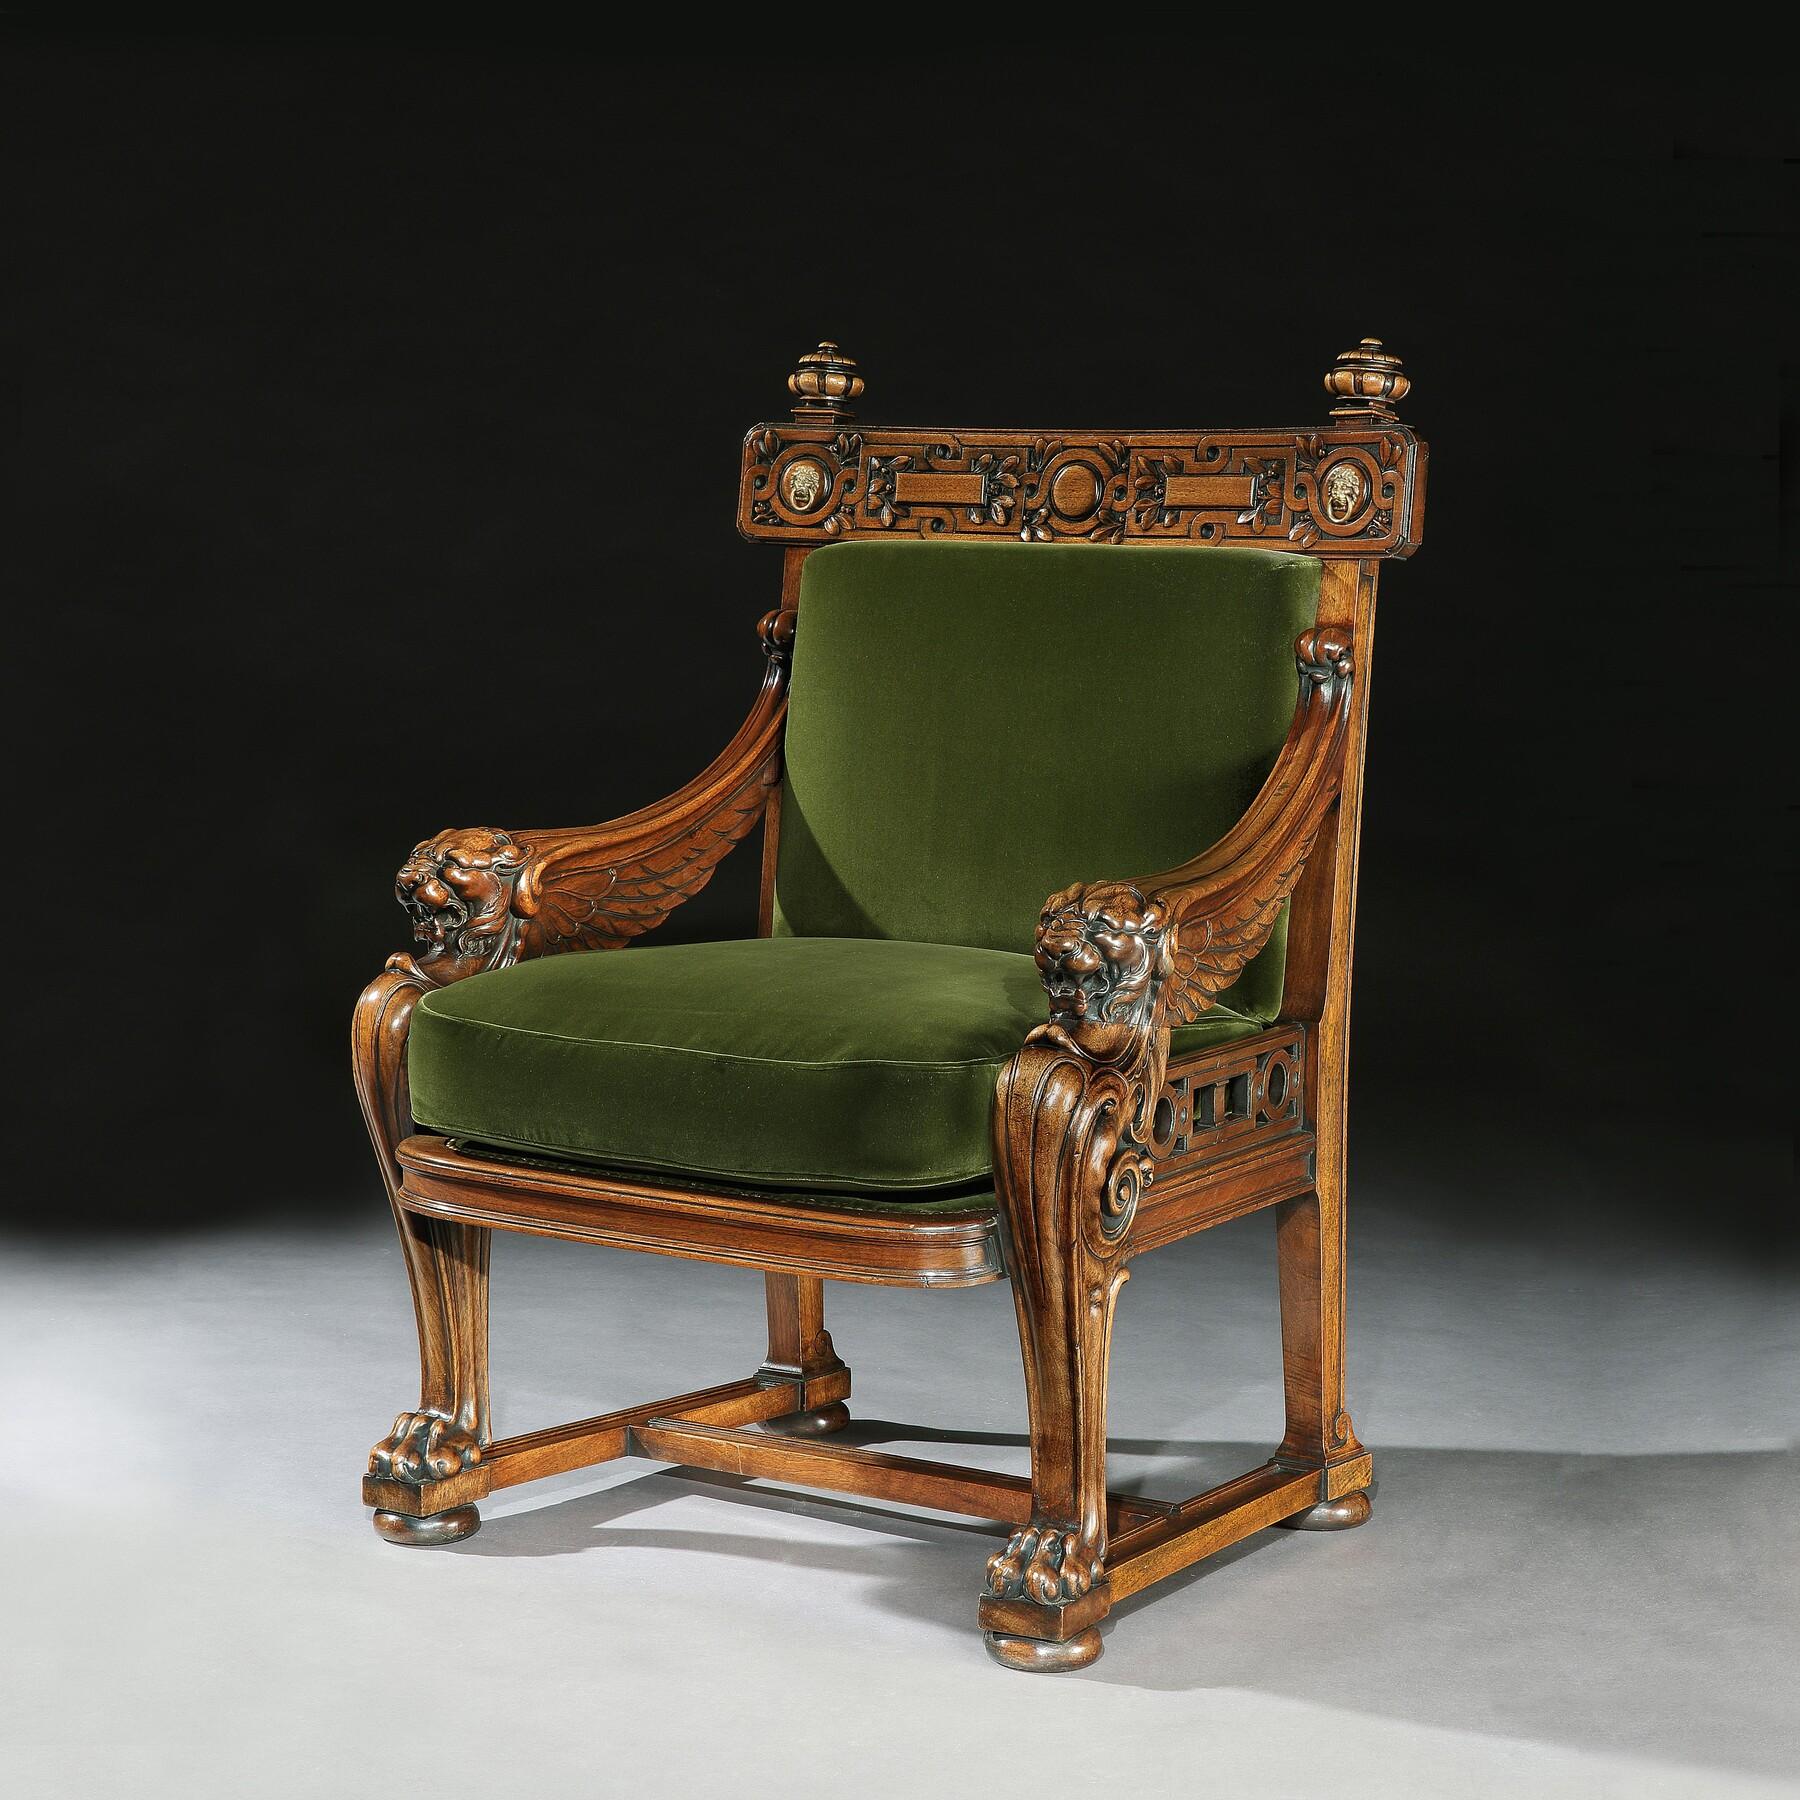 Rare 19th Century Lion Monopodia Armchair After Thomas Hope For Sale 2